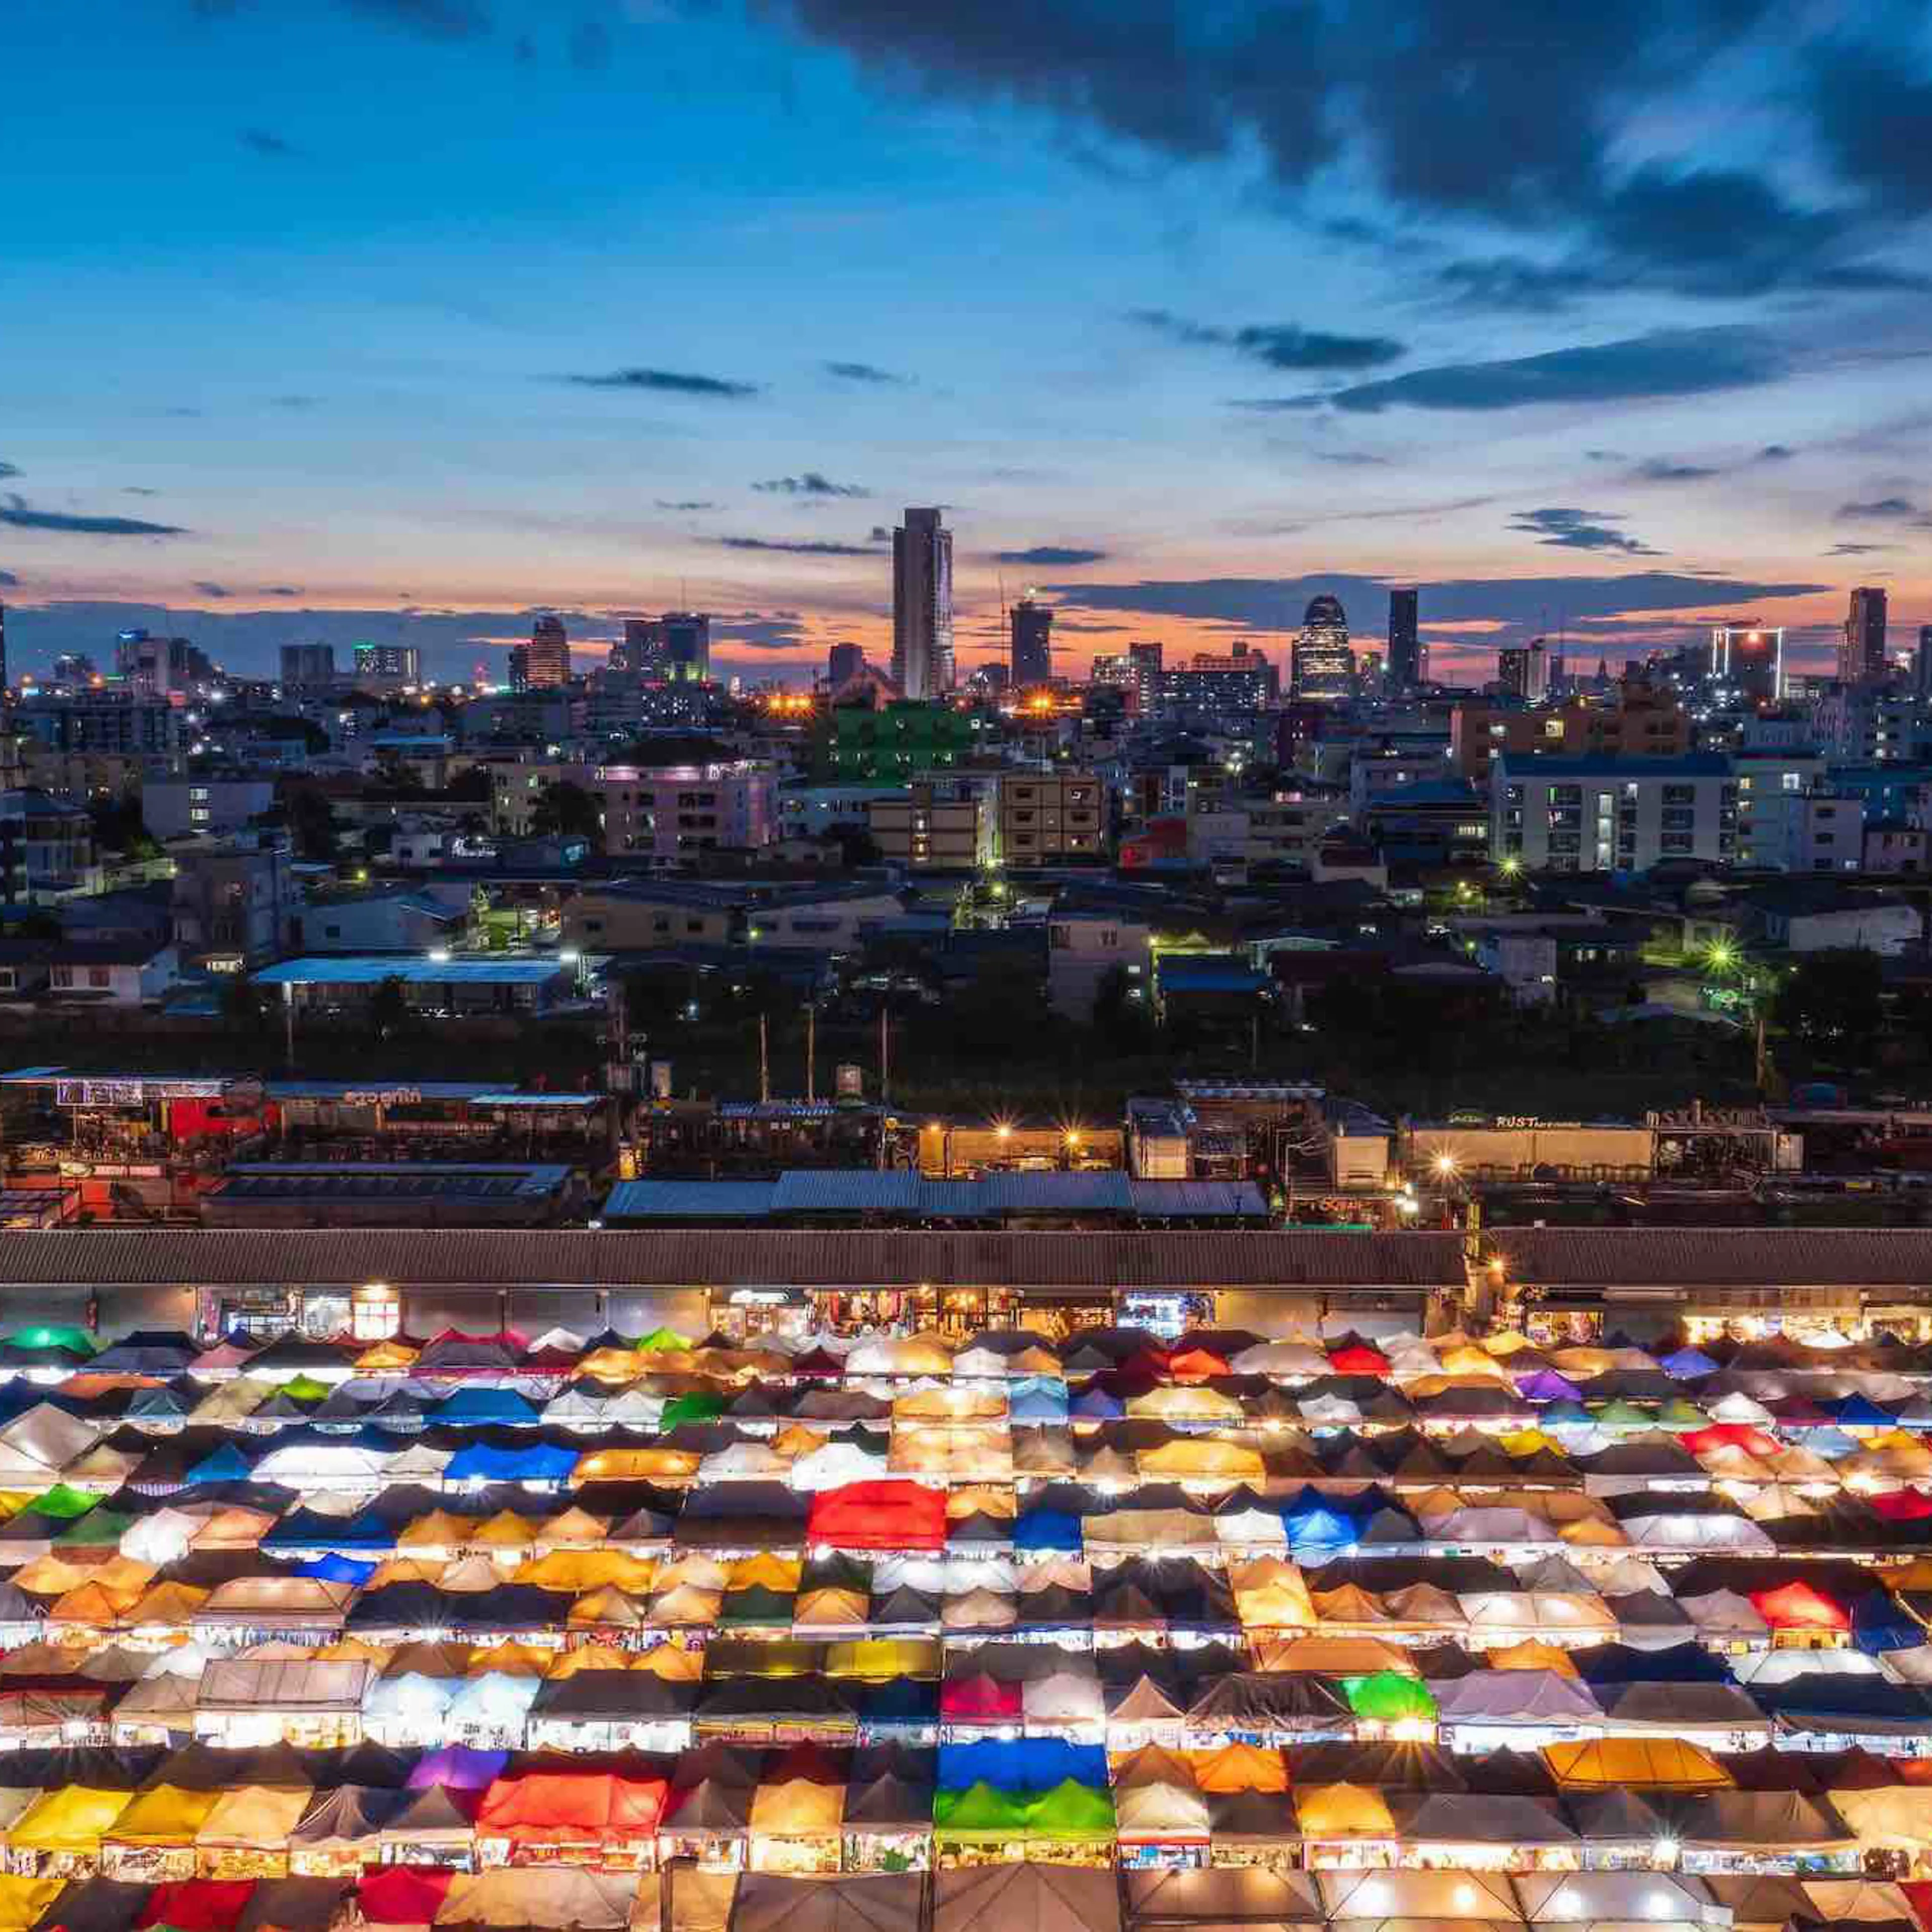 Illuminated colorful tents and the skyline of a big city seen from above